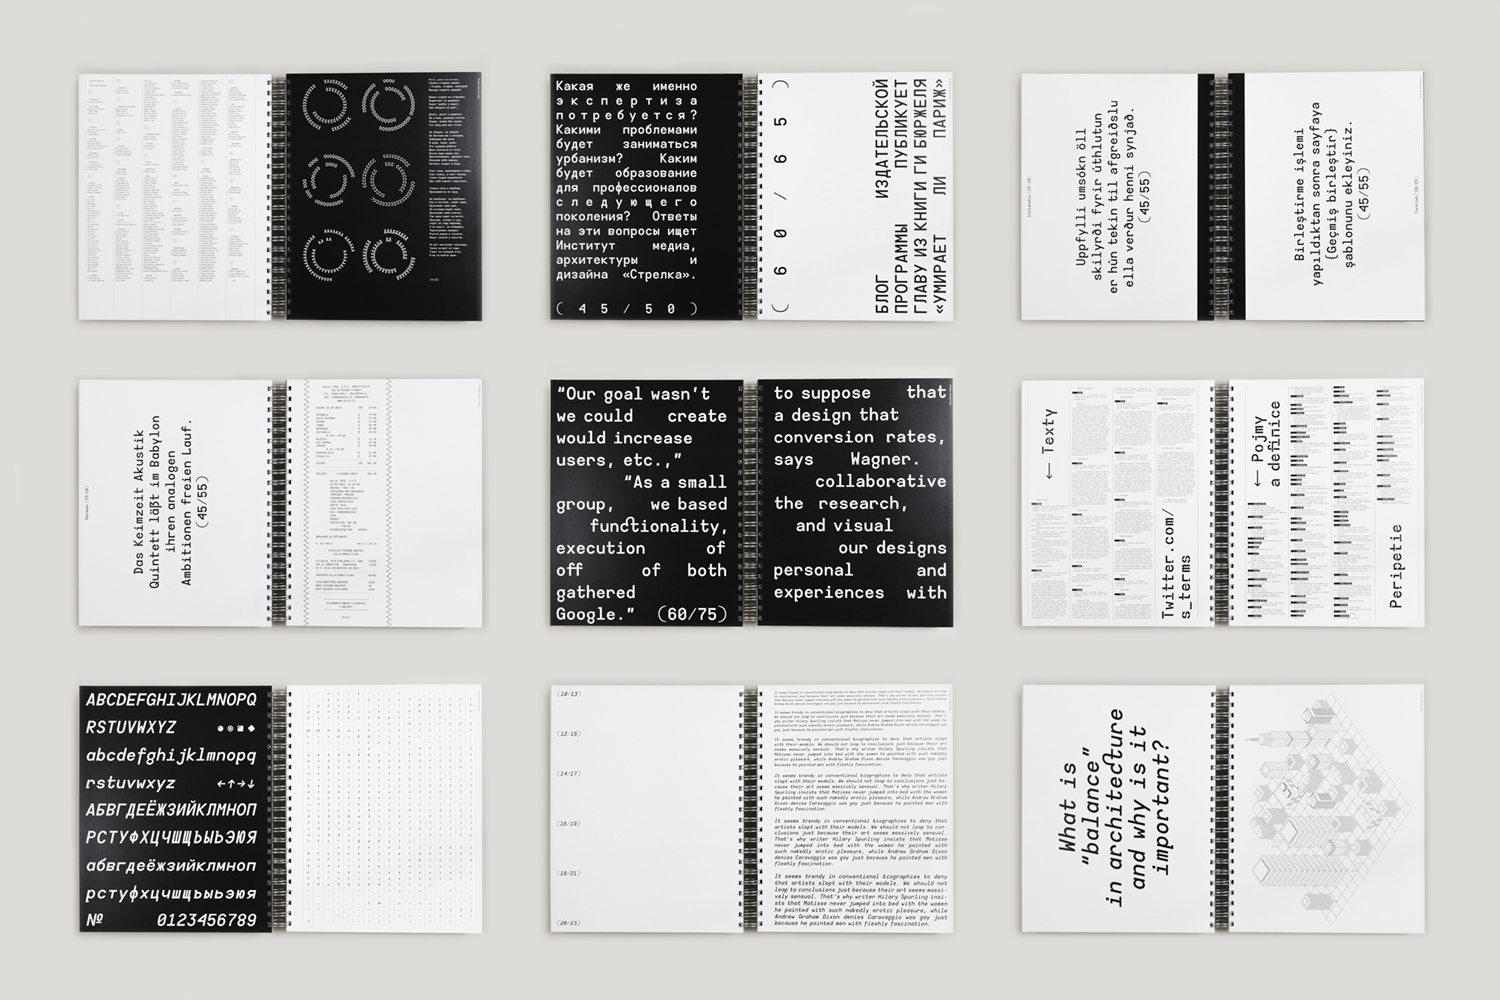 Specimen – All typeface is not available purchase